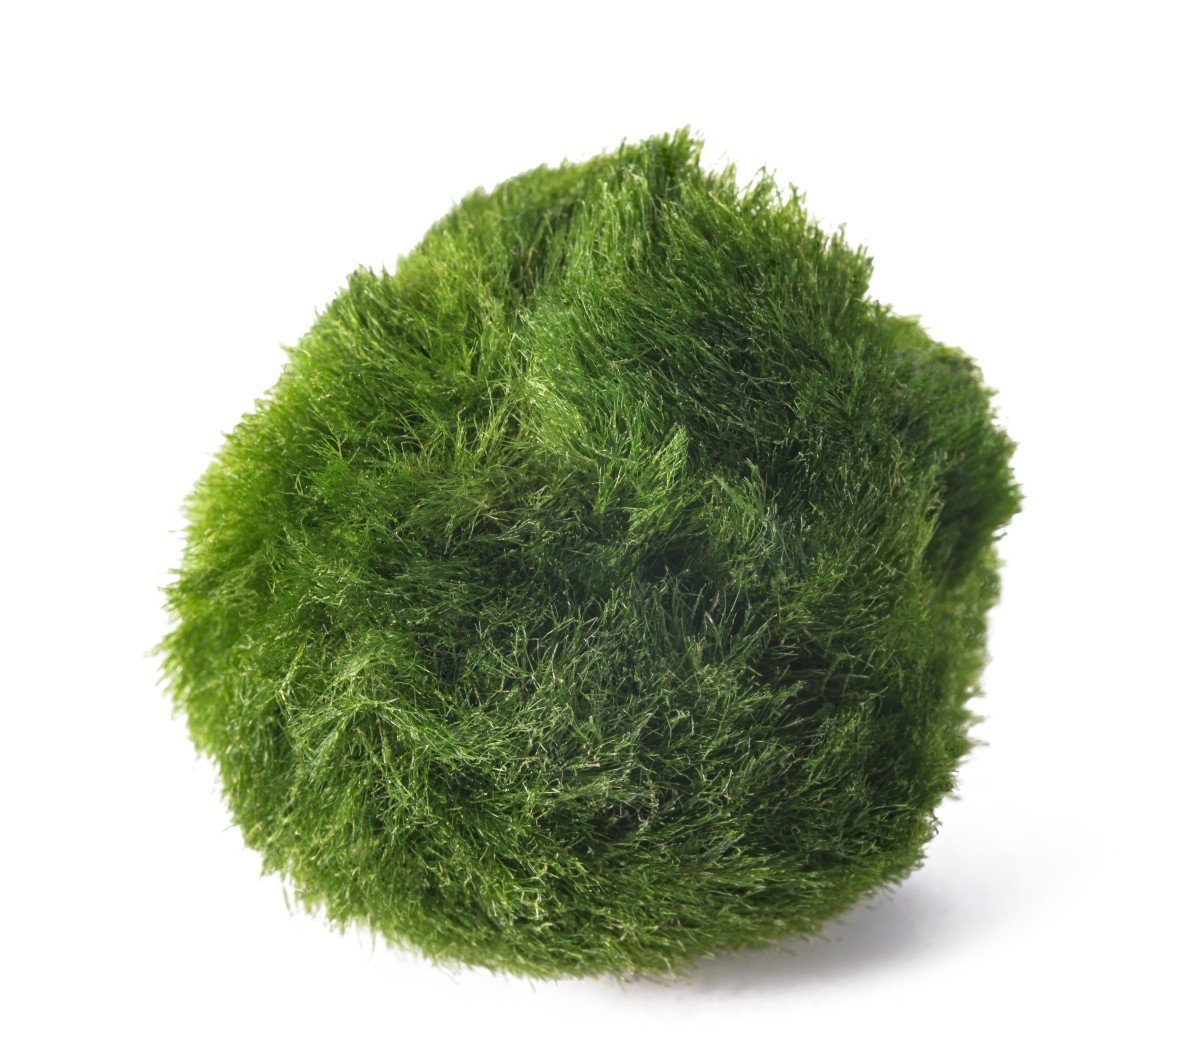 Moss ball isolated on white background